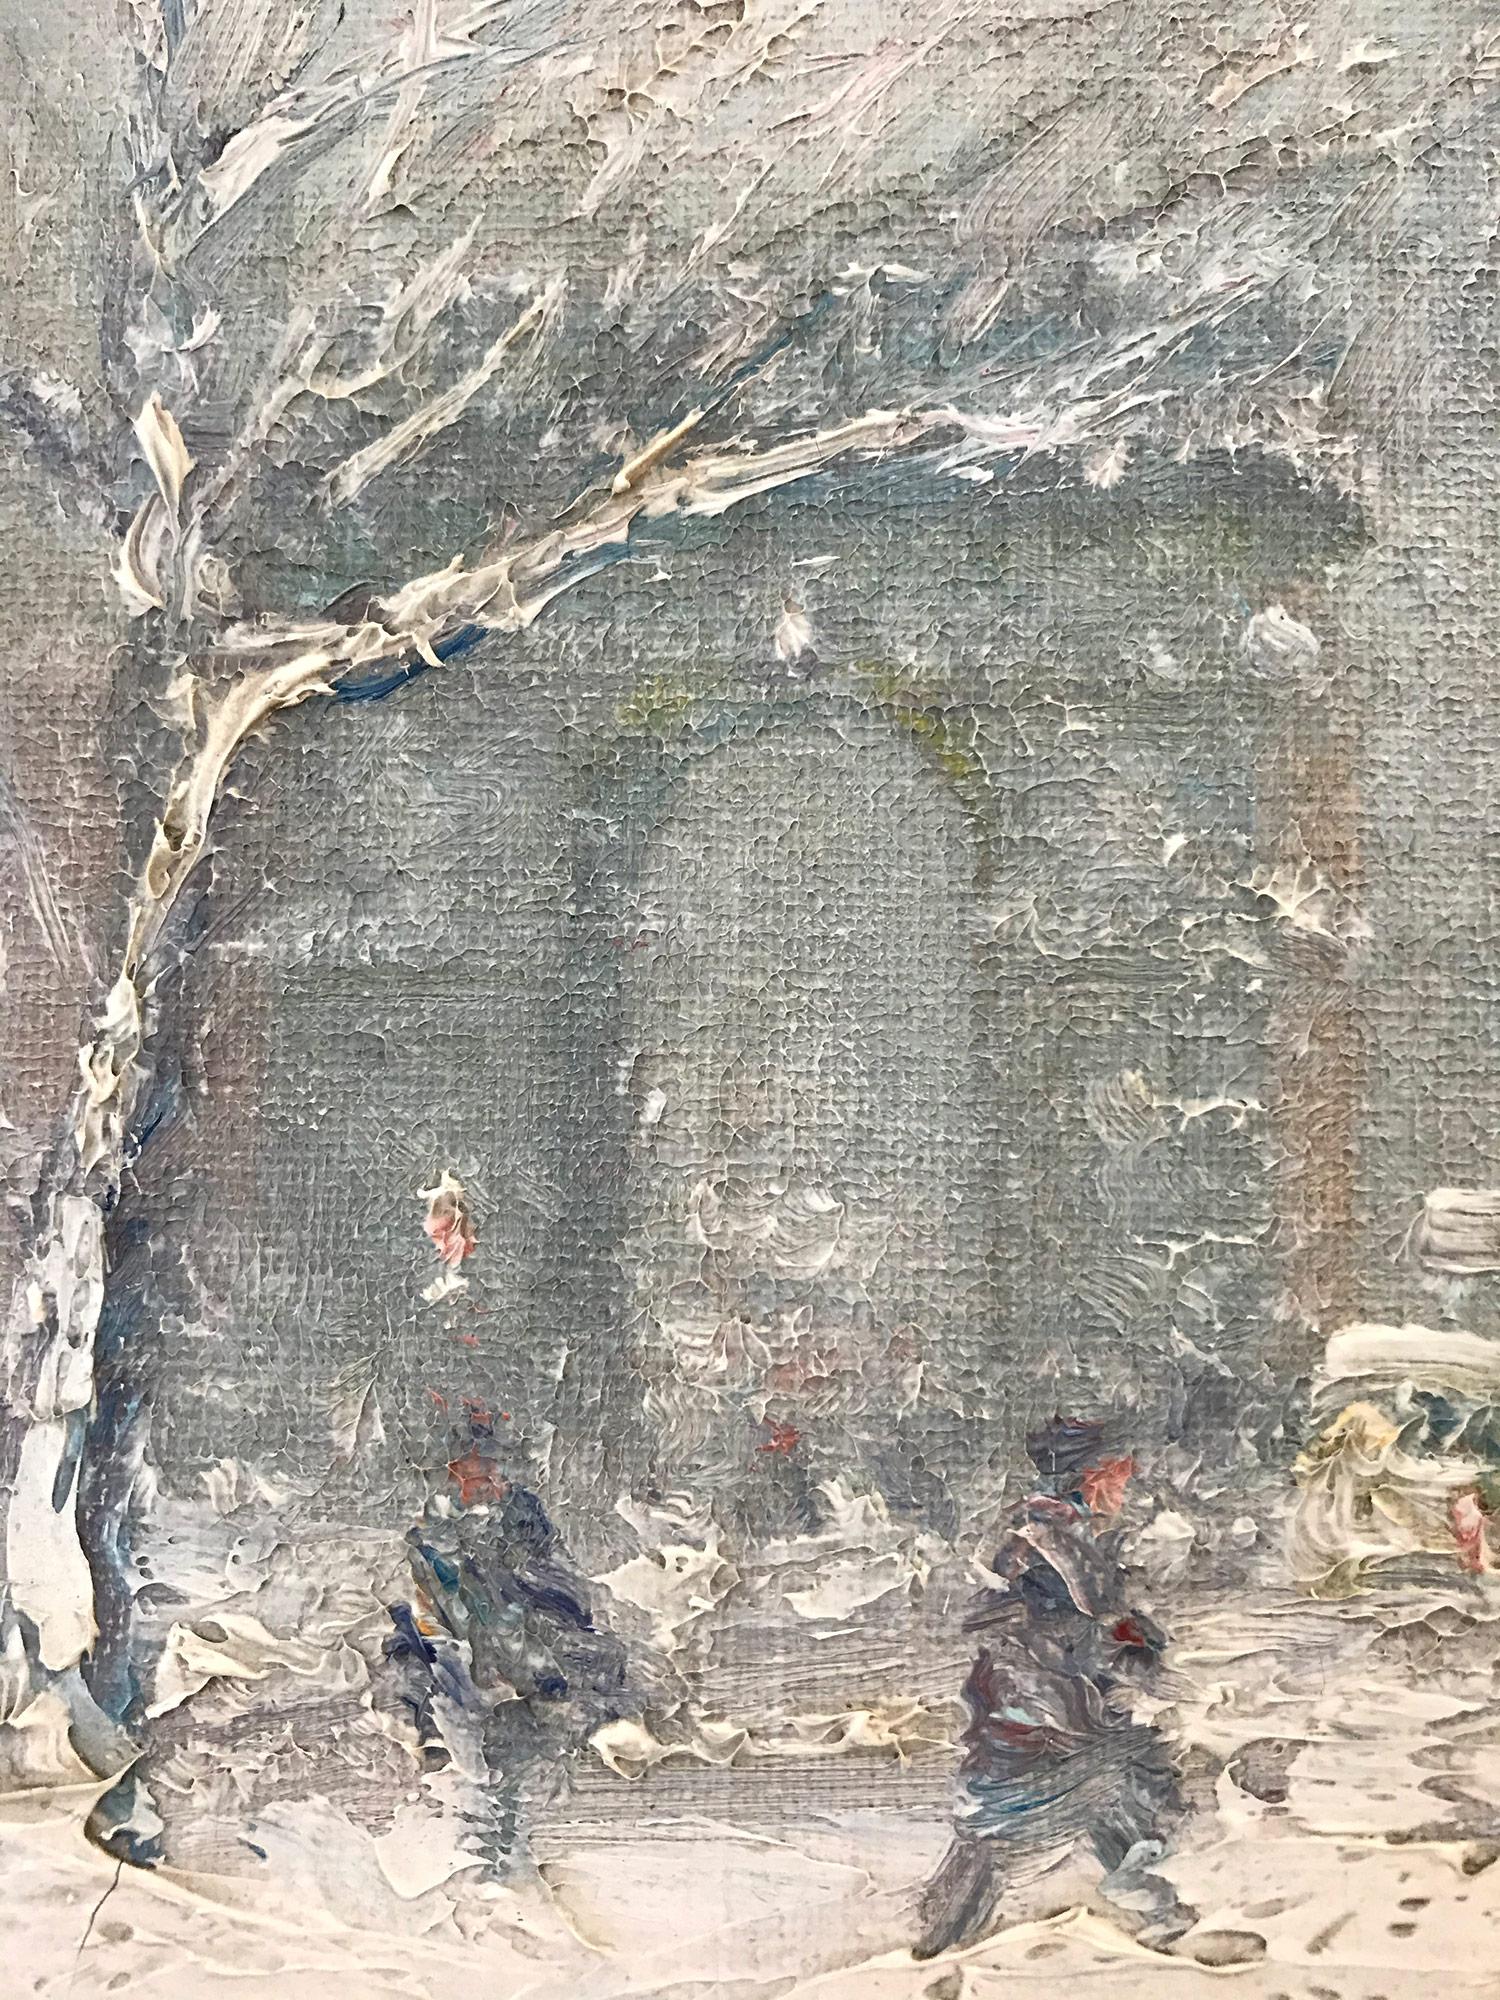 A stunning and pertinent example of Berthelsen's charming New York City winter scenes depicting Washington Square Park in the snow. An iconic scene that so many have come to love and cherish. The artist was truly a master of capturing New York in